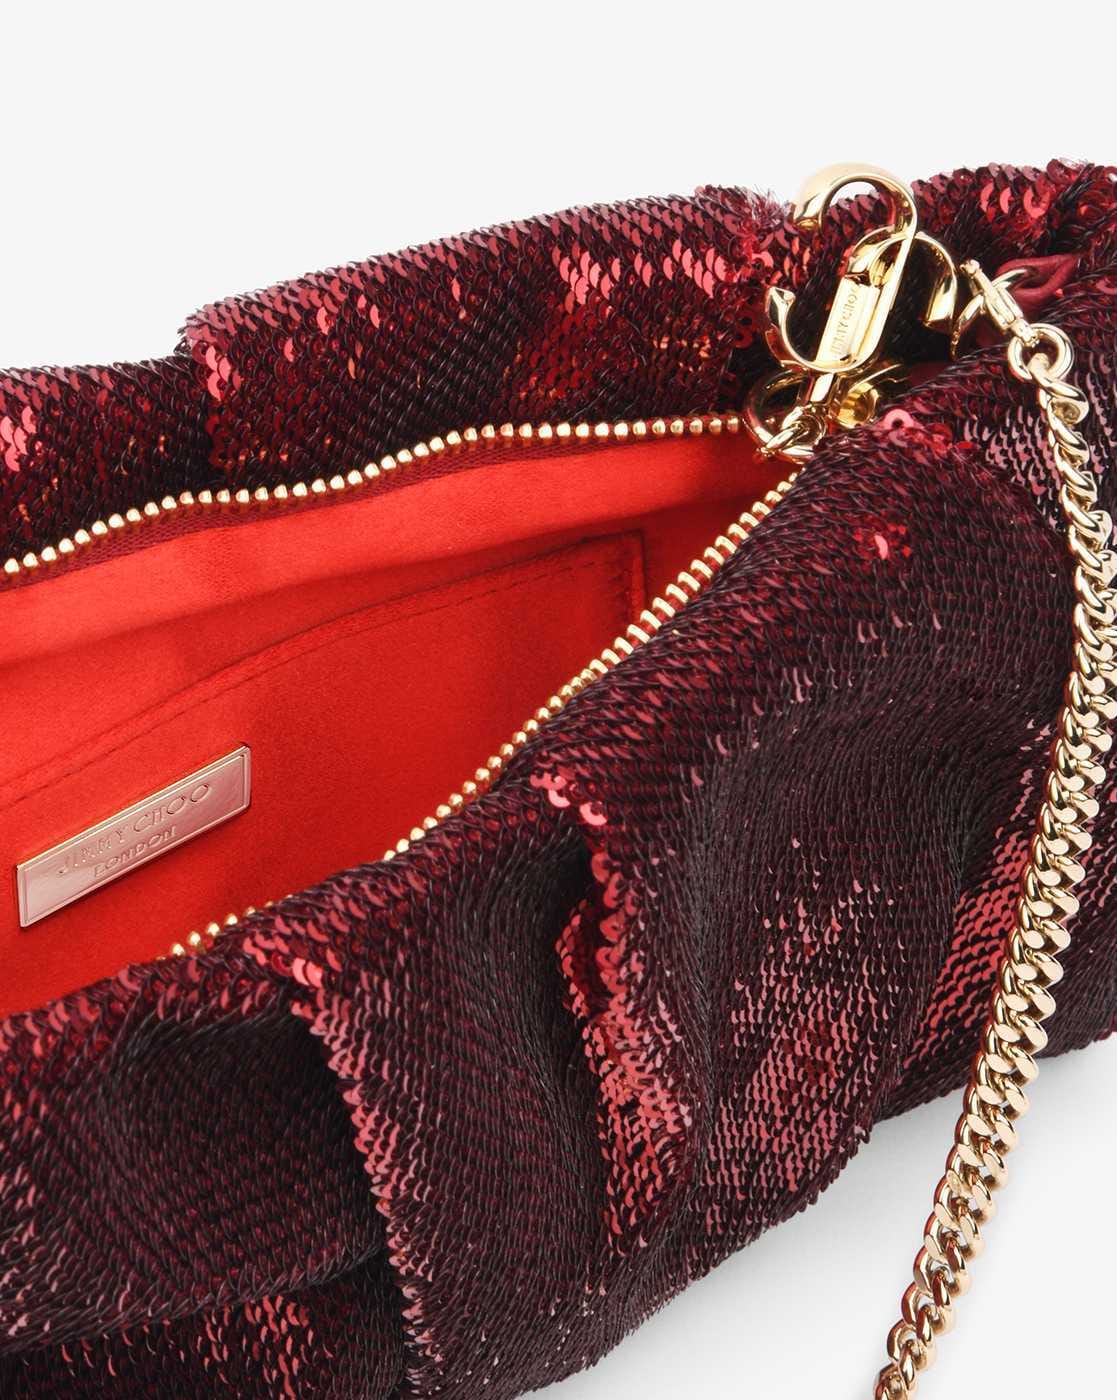 ELEGANT PREMIUM EVENING CLUTCH BAG PATTERNED STONES, GLITTERS & ADJUSTABLE  SHOULDER CHAIN, SNAP CLOSURE & SMOOTH INNER SATIN (Red) - 24x7 eMall